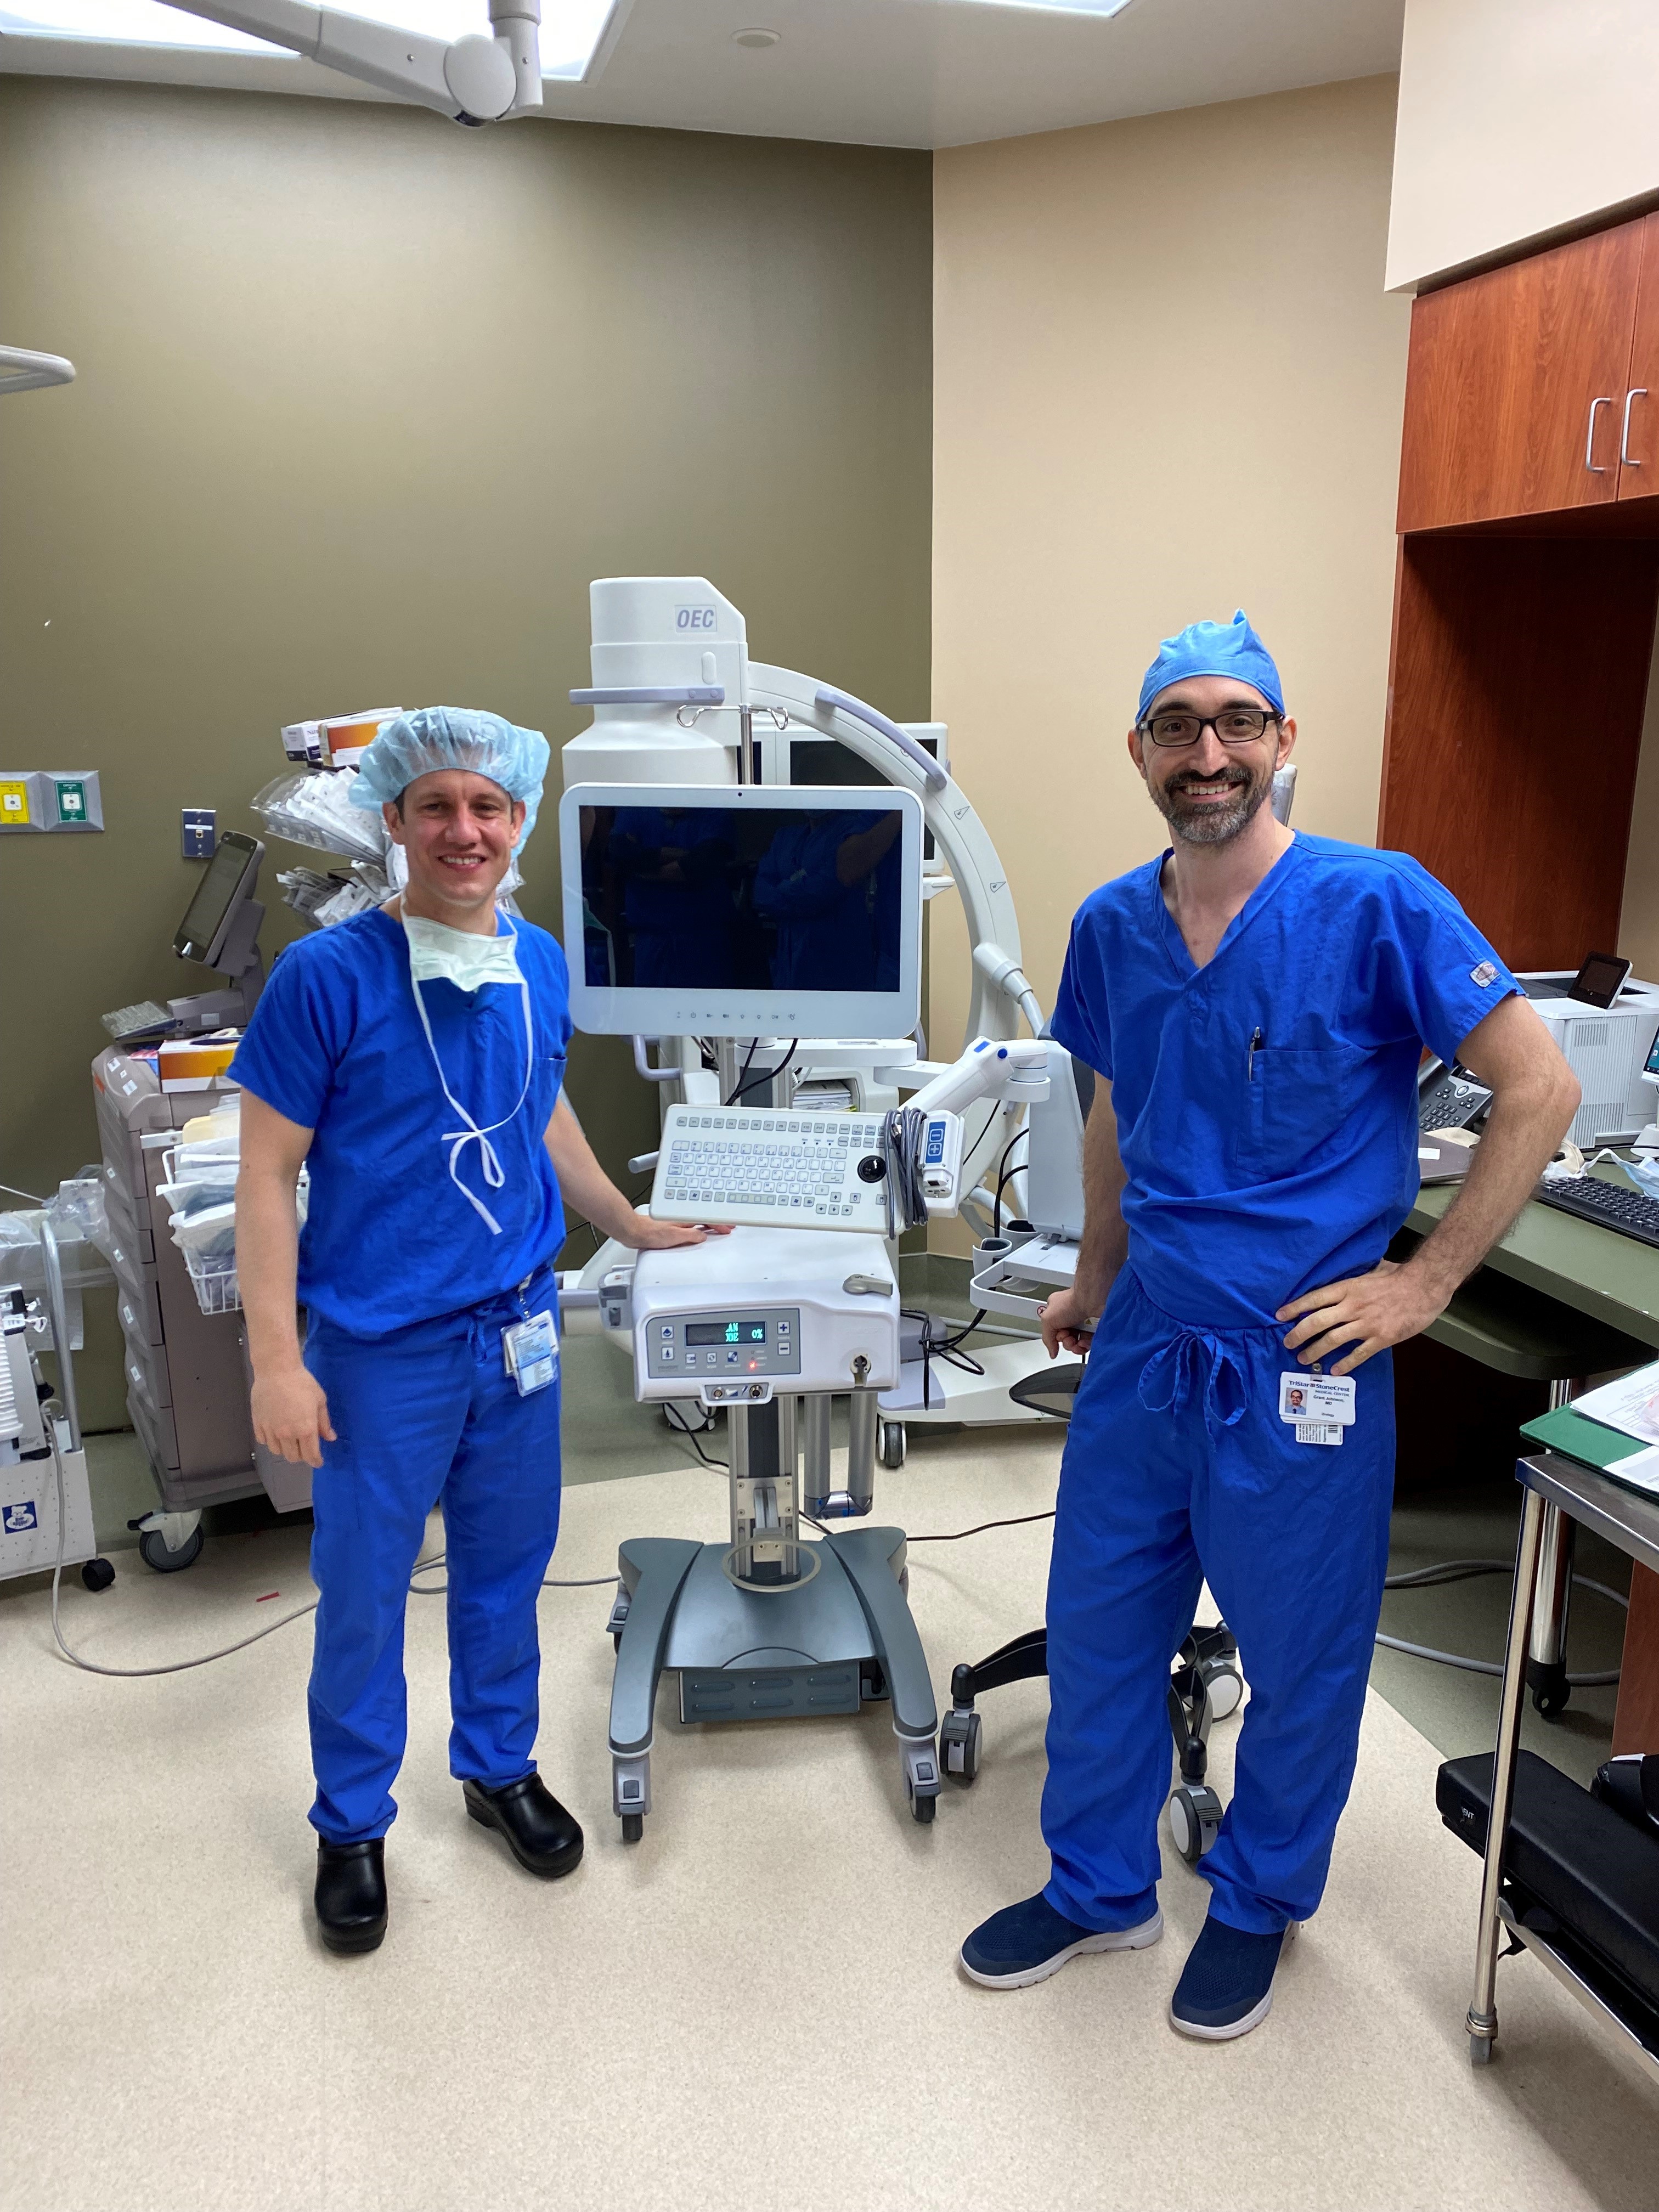 TriStar StoneCrest Urologists Dr. Grant Johnson and Dr. Alberic Rogman smile while standing in front of the aquablation device.